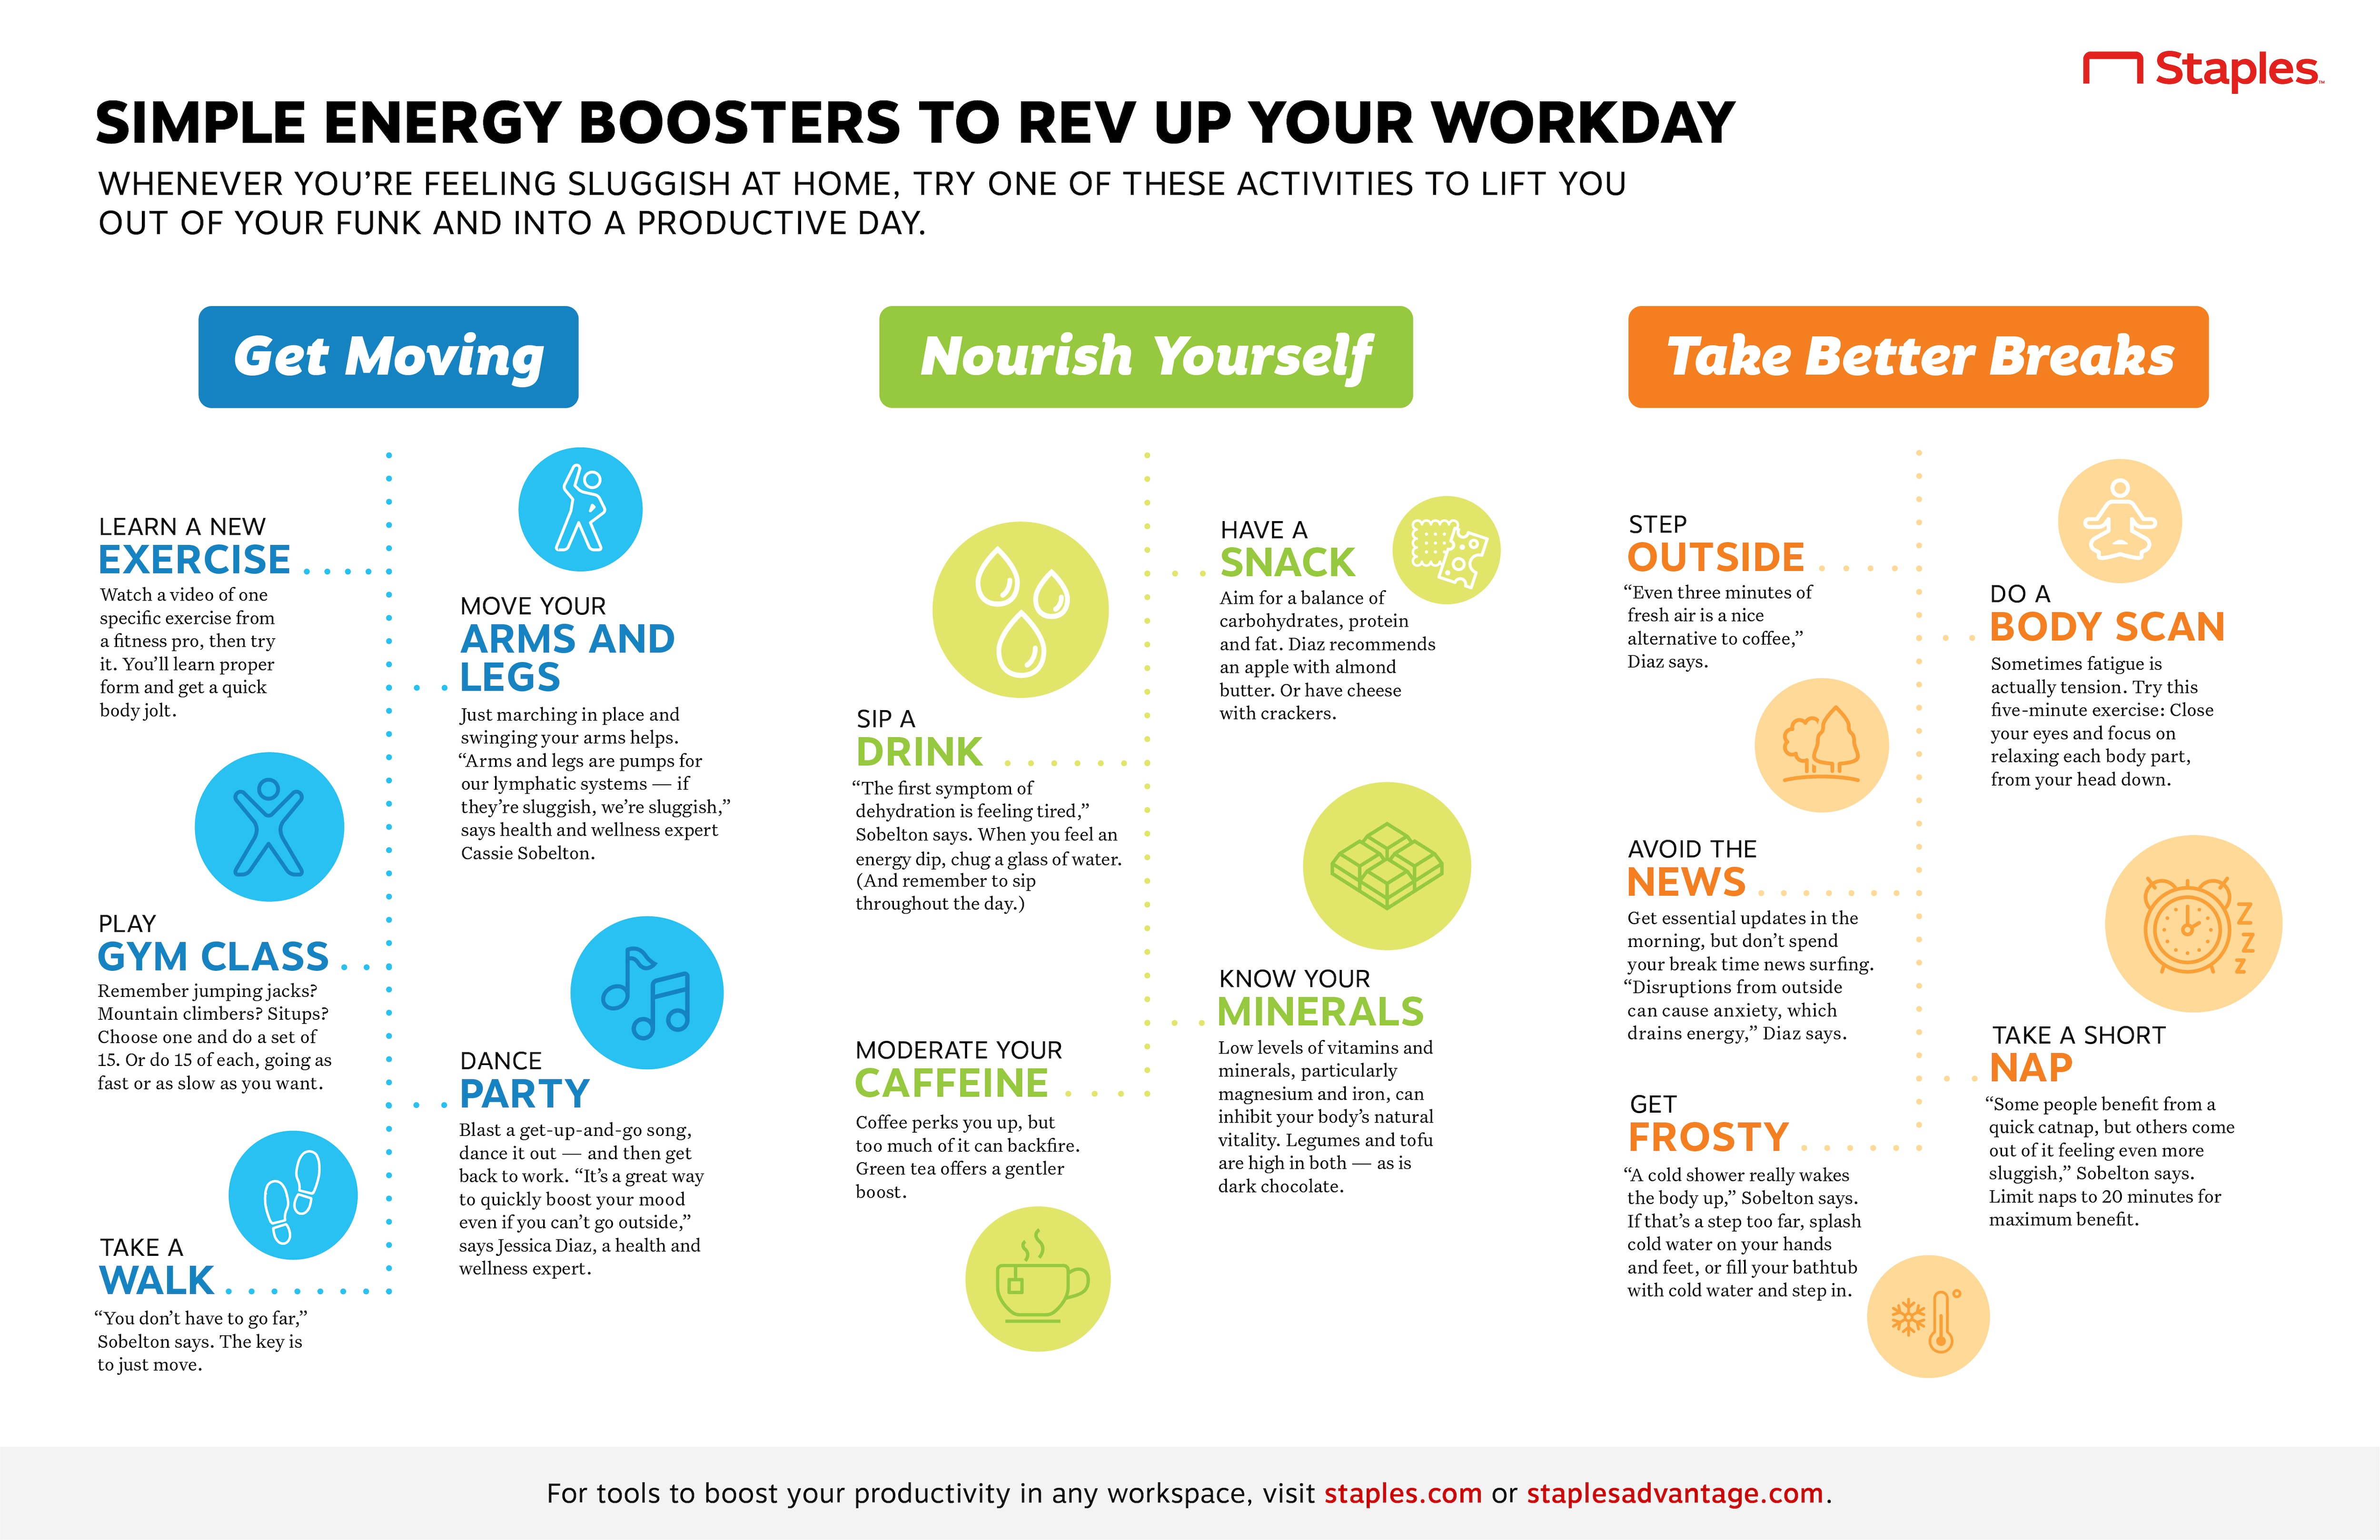 Energy boosters for work